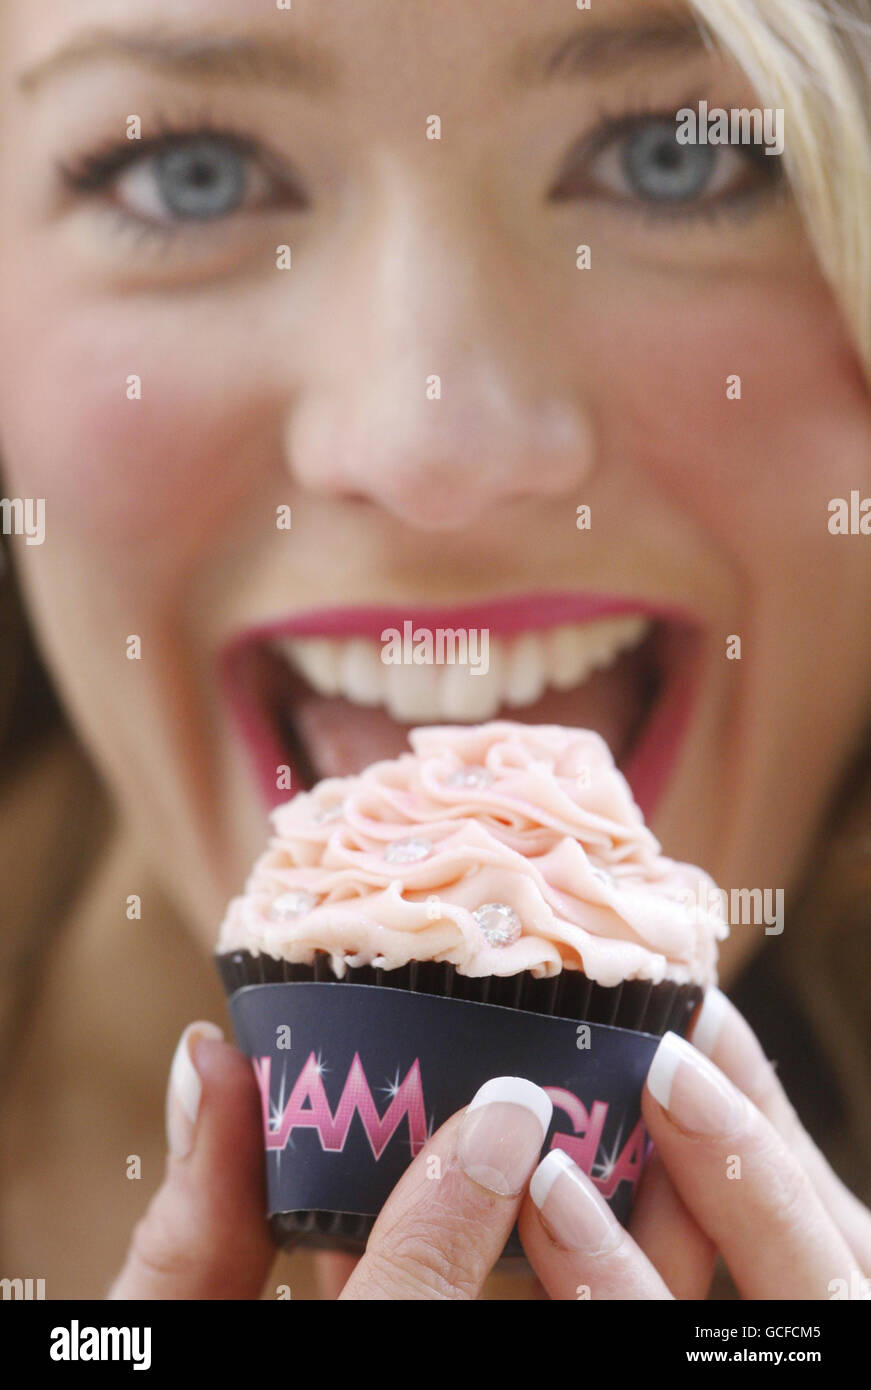 Model Lorna Keir holds a cup Cake worth 100,000 during a photocall at Rox in Glasgow to promote female consumer event Glam. Stock Photo